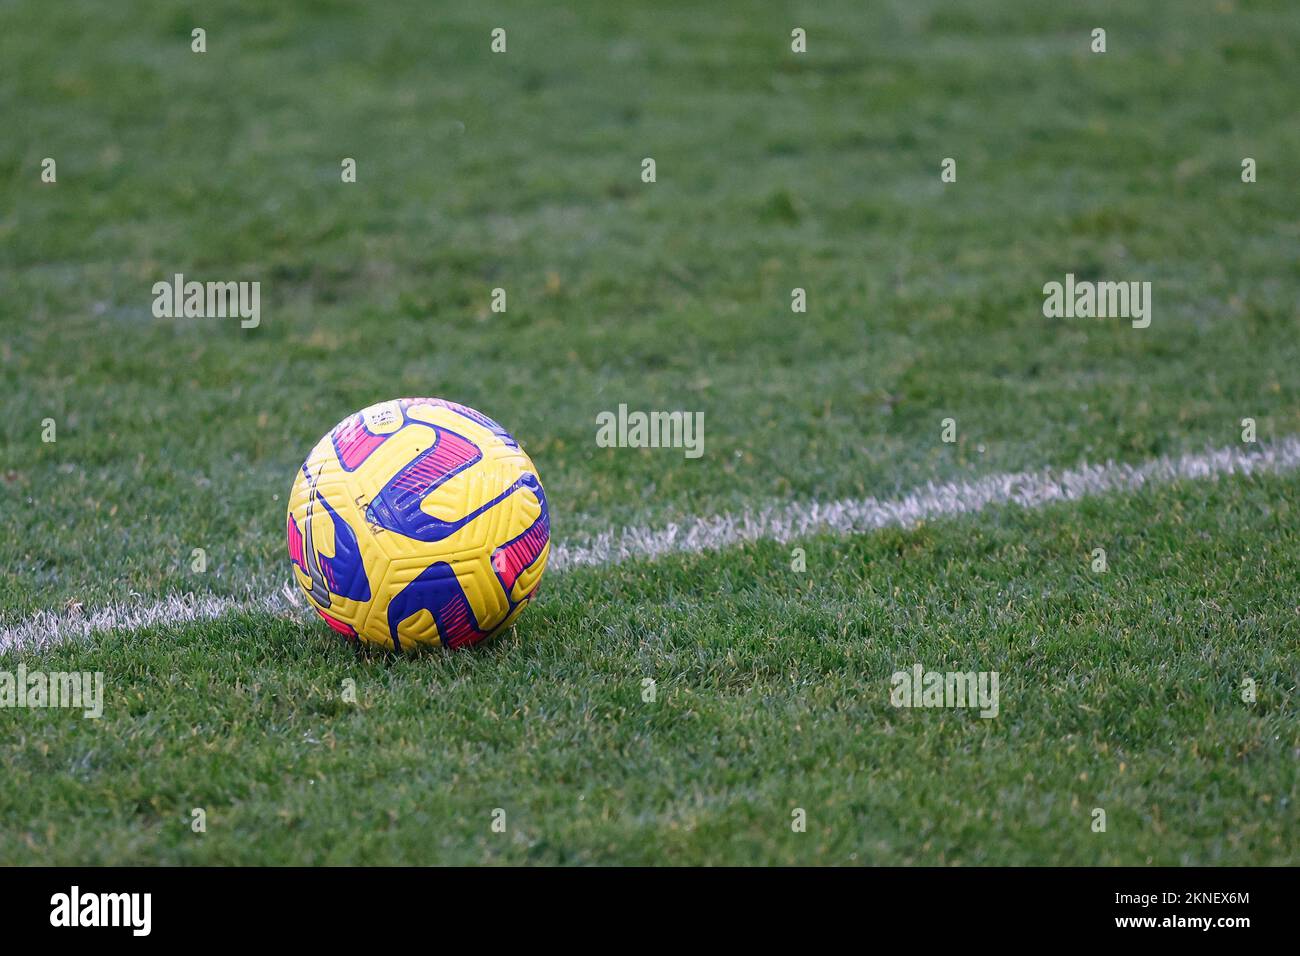 WSL match ball during the FA Womens Continental League Cup match Liverpool Women vs Blackburn Rovers Ladies at Prenton Park, Birkenhead, United Kingdom, 27th November 2022  (Photo by Phil Bryan/News Images) Stock Photo